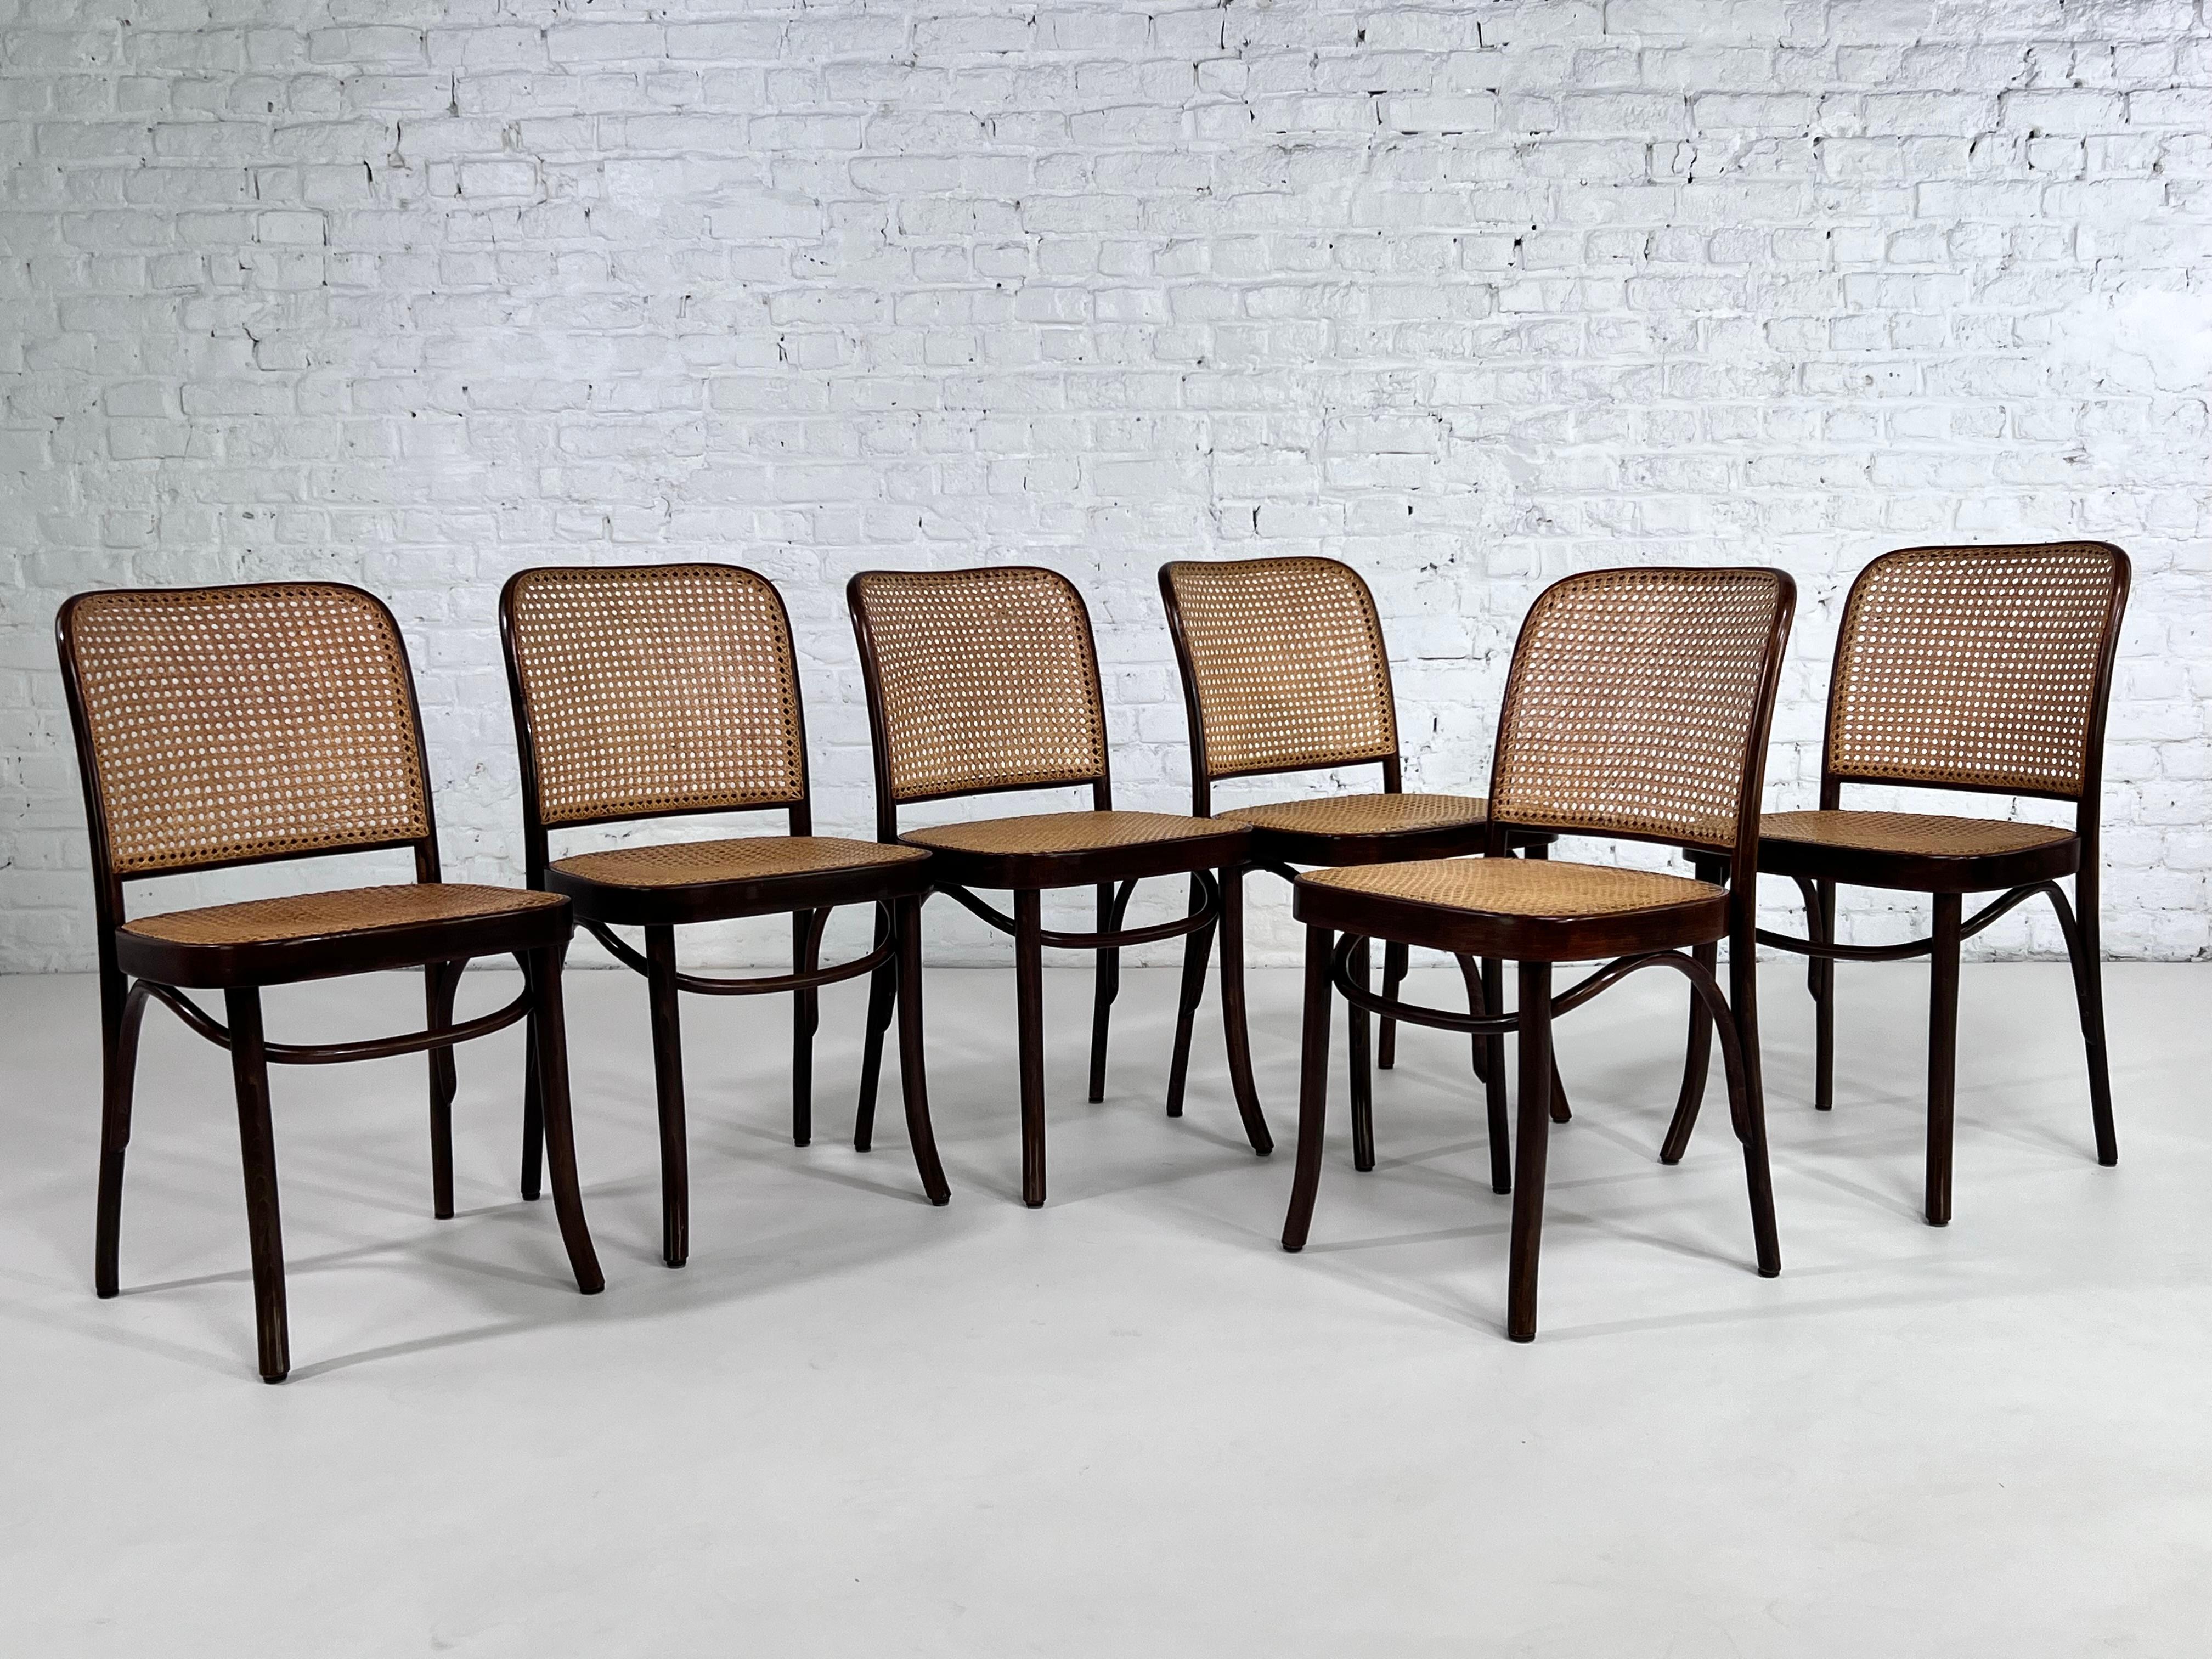 Mid-Century Modern 1920s Josef Hoffman Bentwood and Cane Set of 6 Chairs Prague Model for Thonet